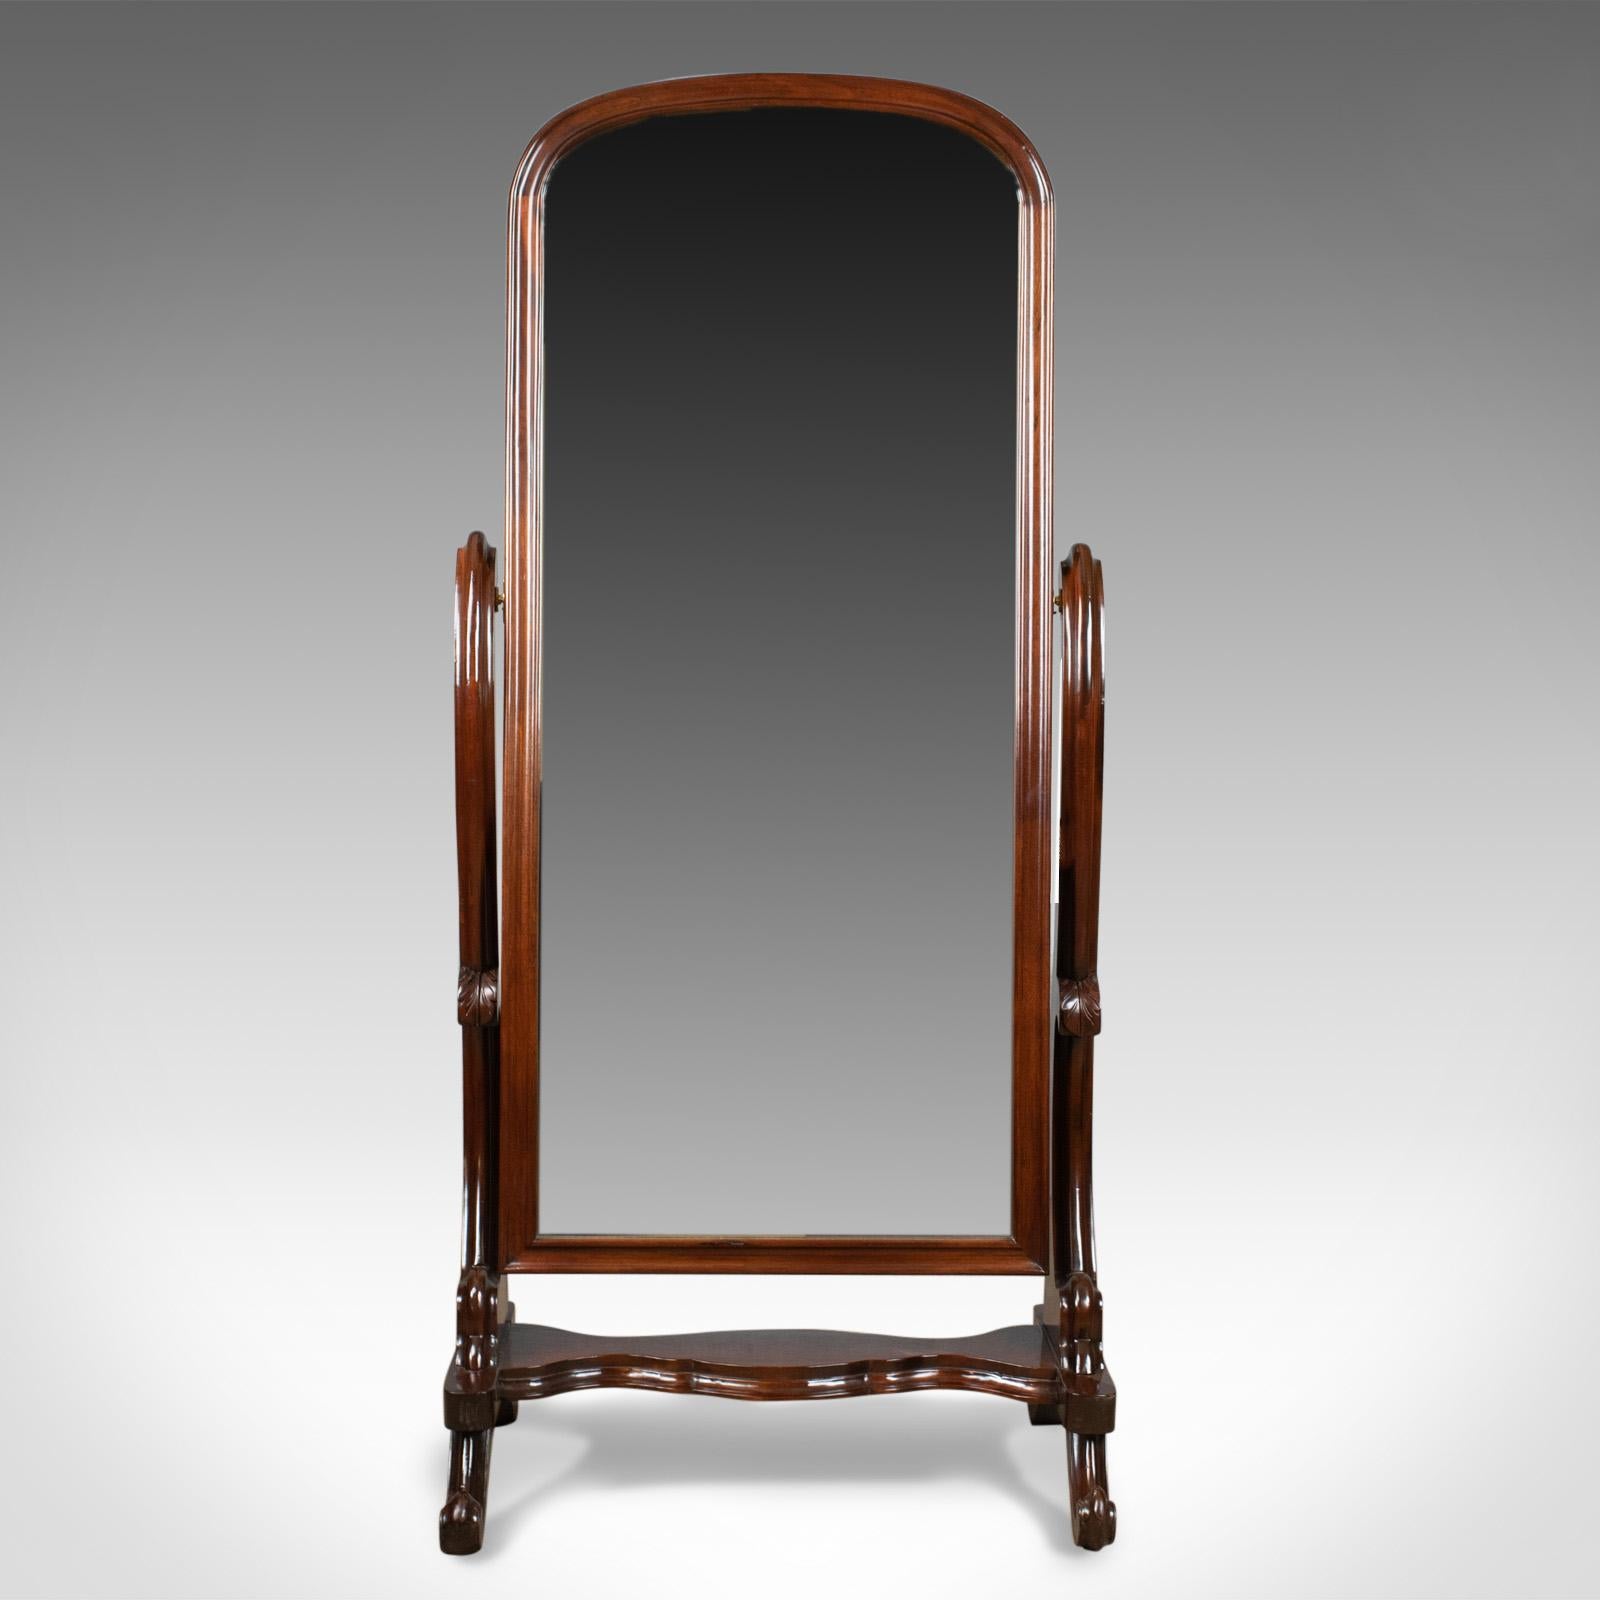 This is a vintage cheval mirror, an English, Victorian revival, full length dressing mirror, tilting in mahogany stand dating to circa 1970.

Large quality mirror plate
Mounted in arched mahogany frame
Paneled back ideal for centre room